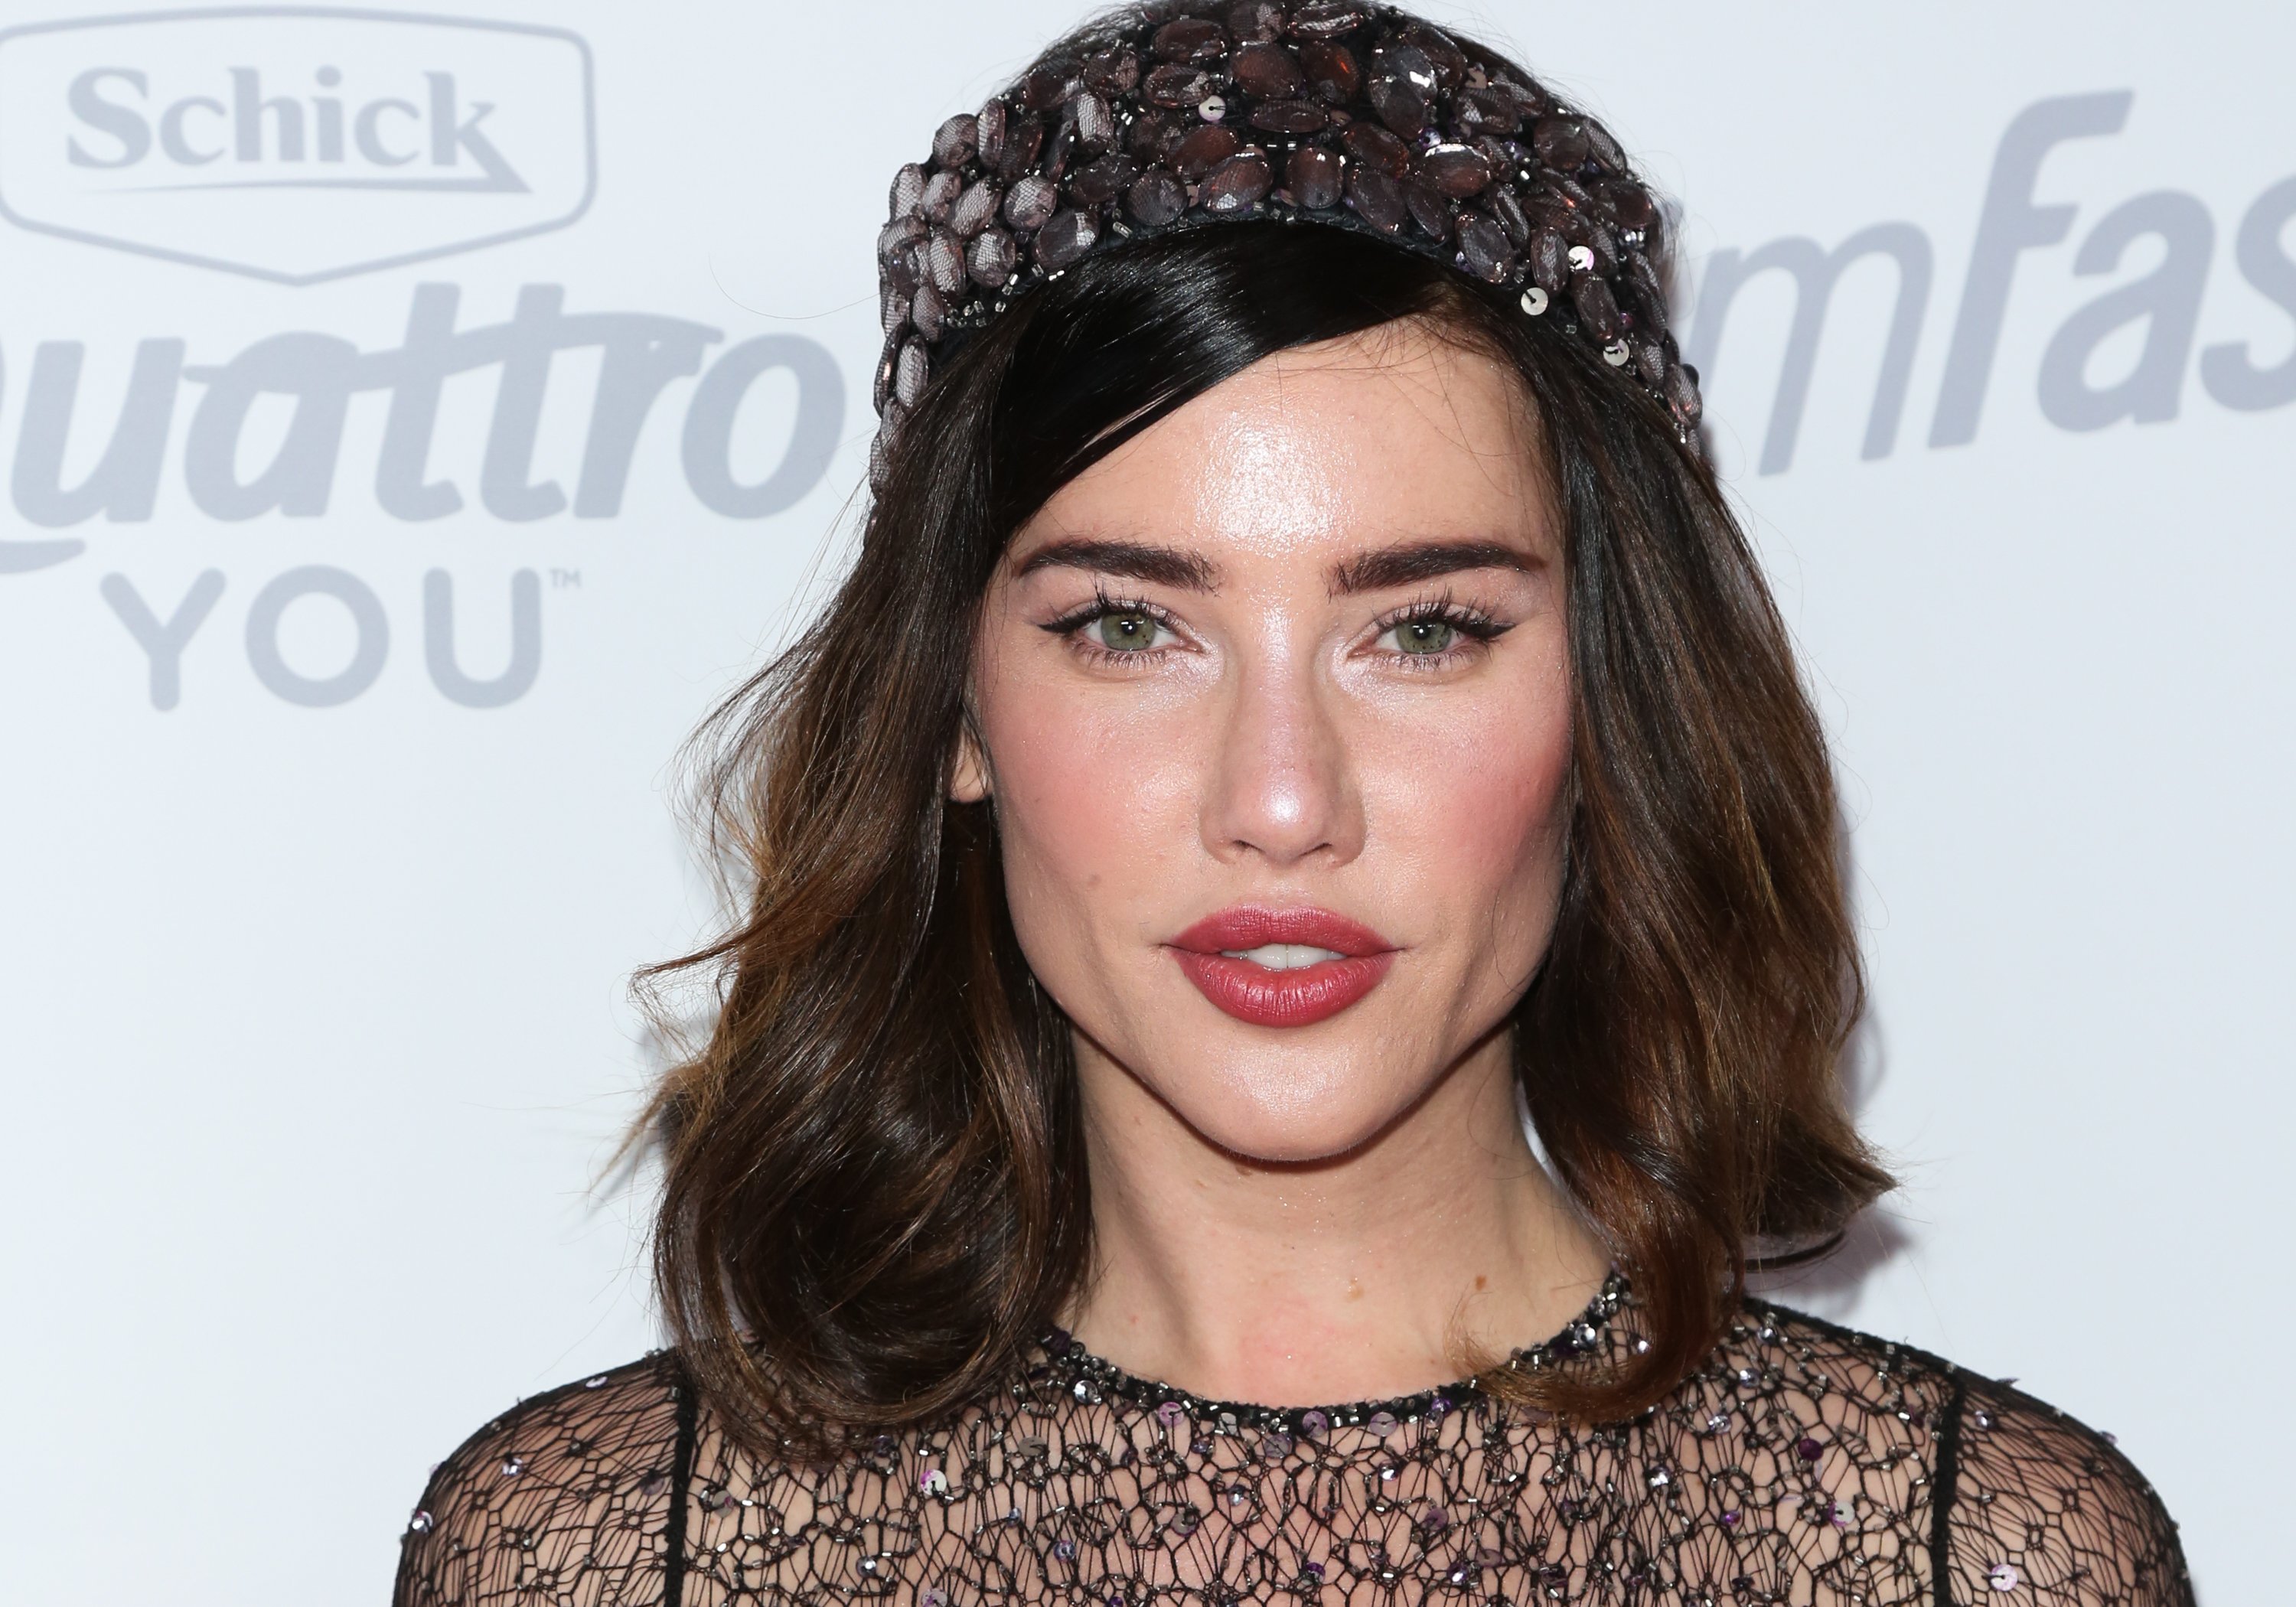 'The Bold and the Beautiful' actor Jacqueline MacInnes Wood wearing a black sparkly dress and matching hat.